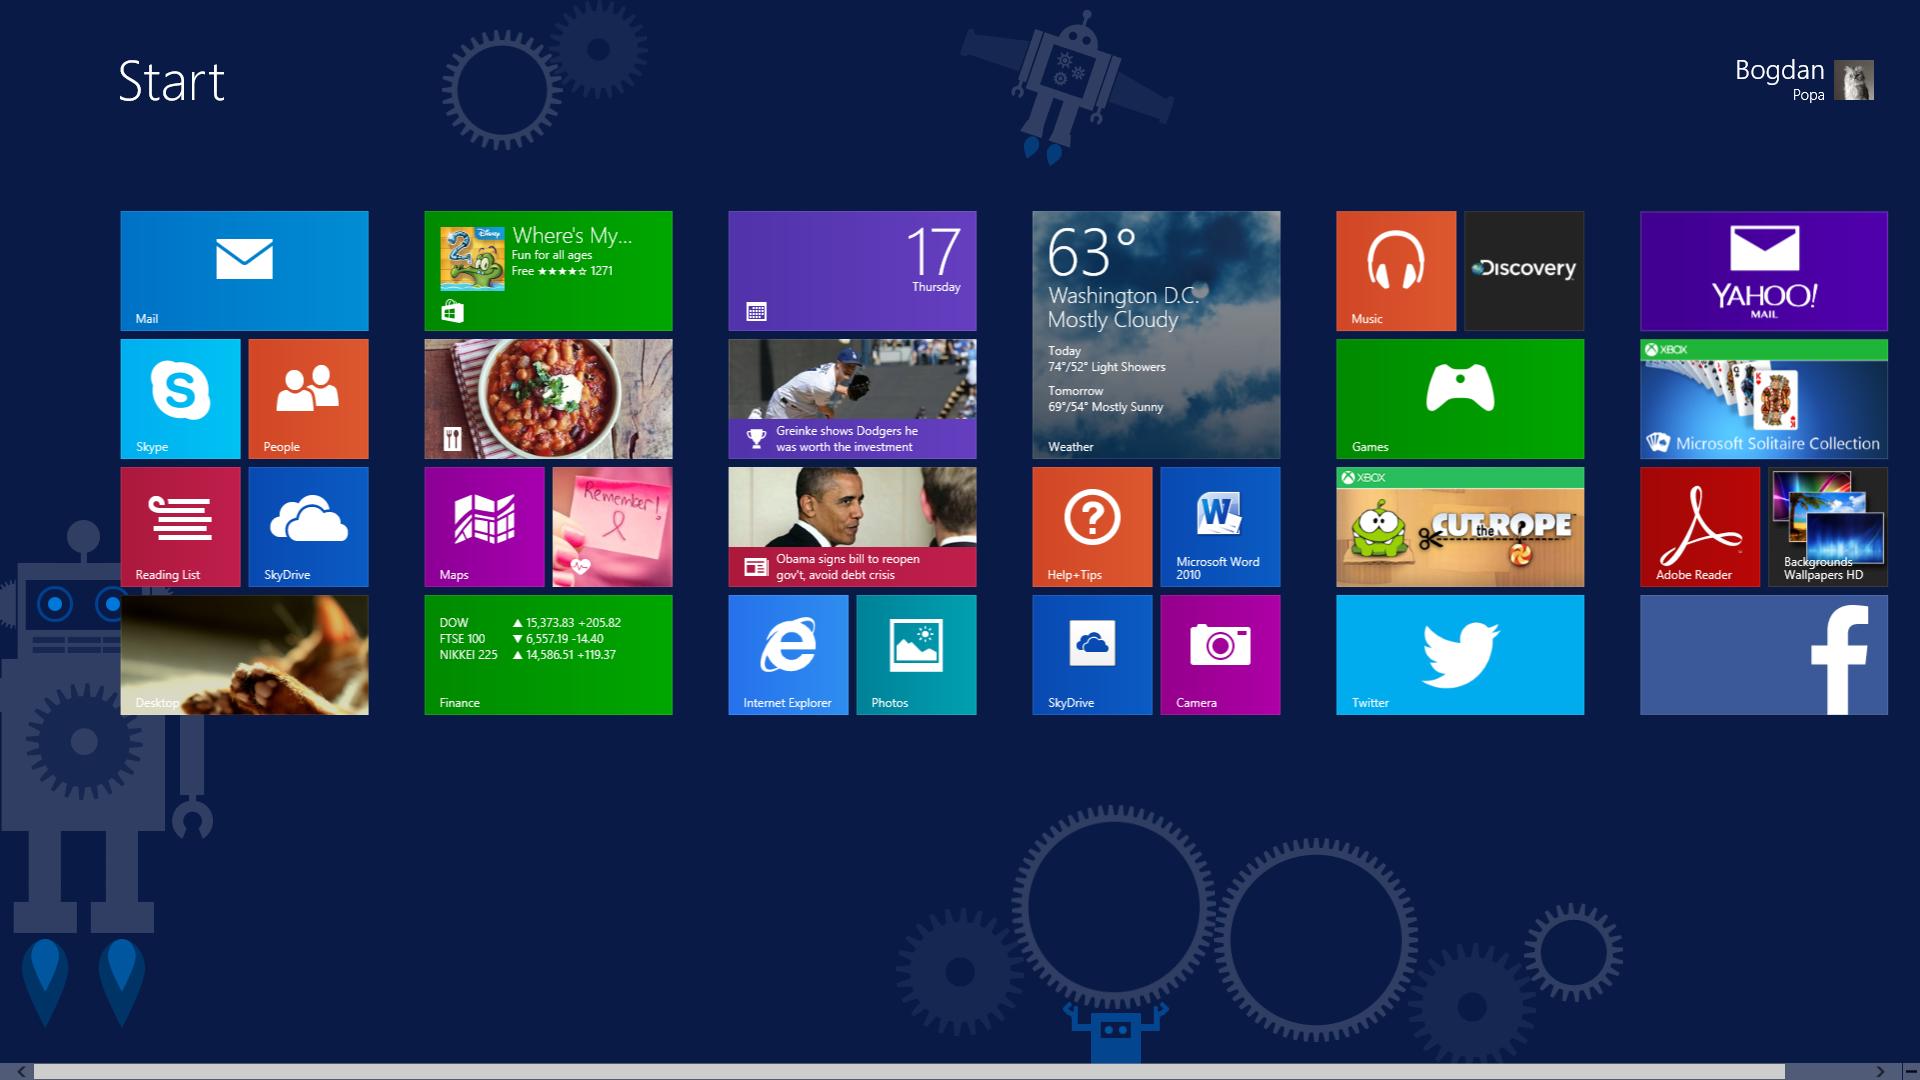 The-Start-Menu-Already-Exists-in-Windows-8-1-Update-1-Beta-Tester-Claims-415241-2.jpg